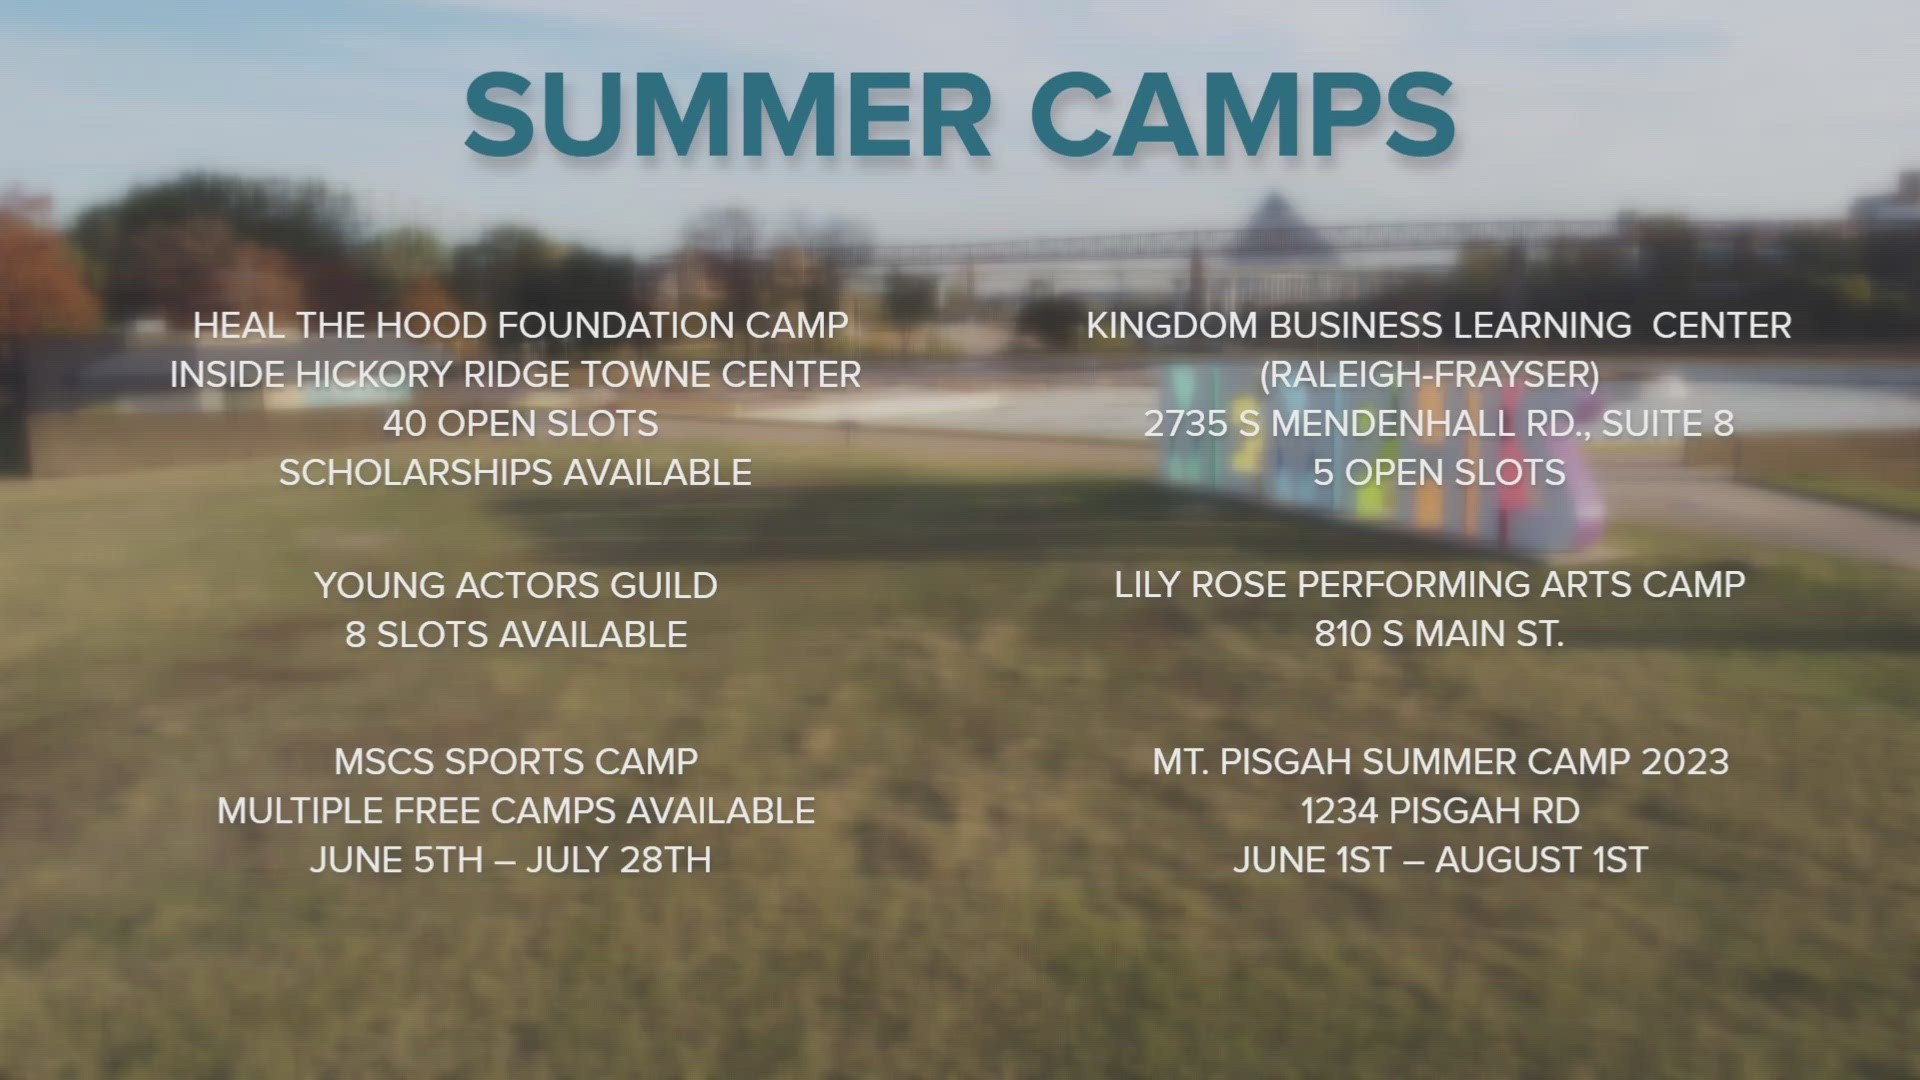 Summer break is quickly approaching, and parents who are still looking for summer camp options for their kids are running out of time